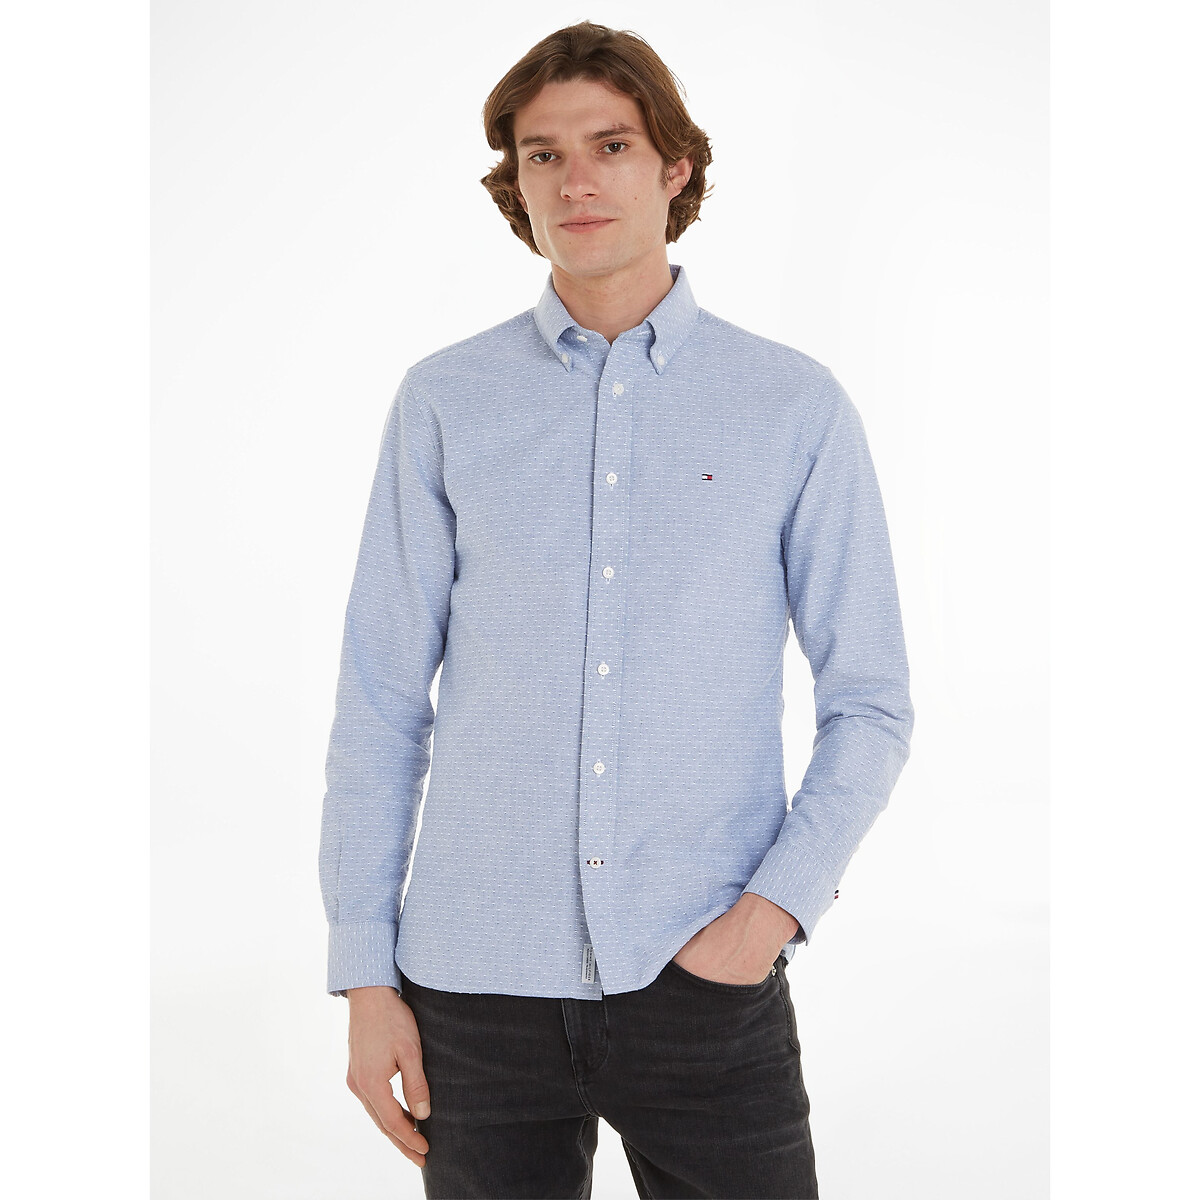 Dobby Cotton Oxford Shirt with Buttoned Collar